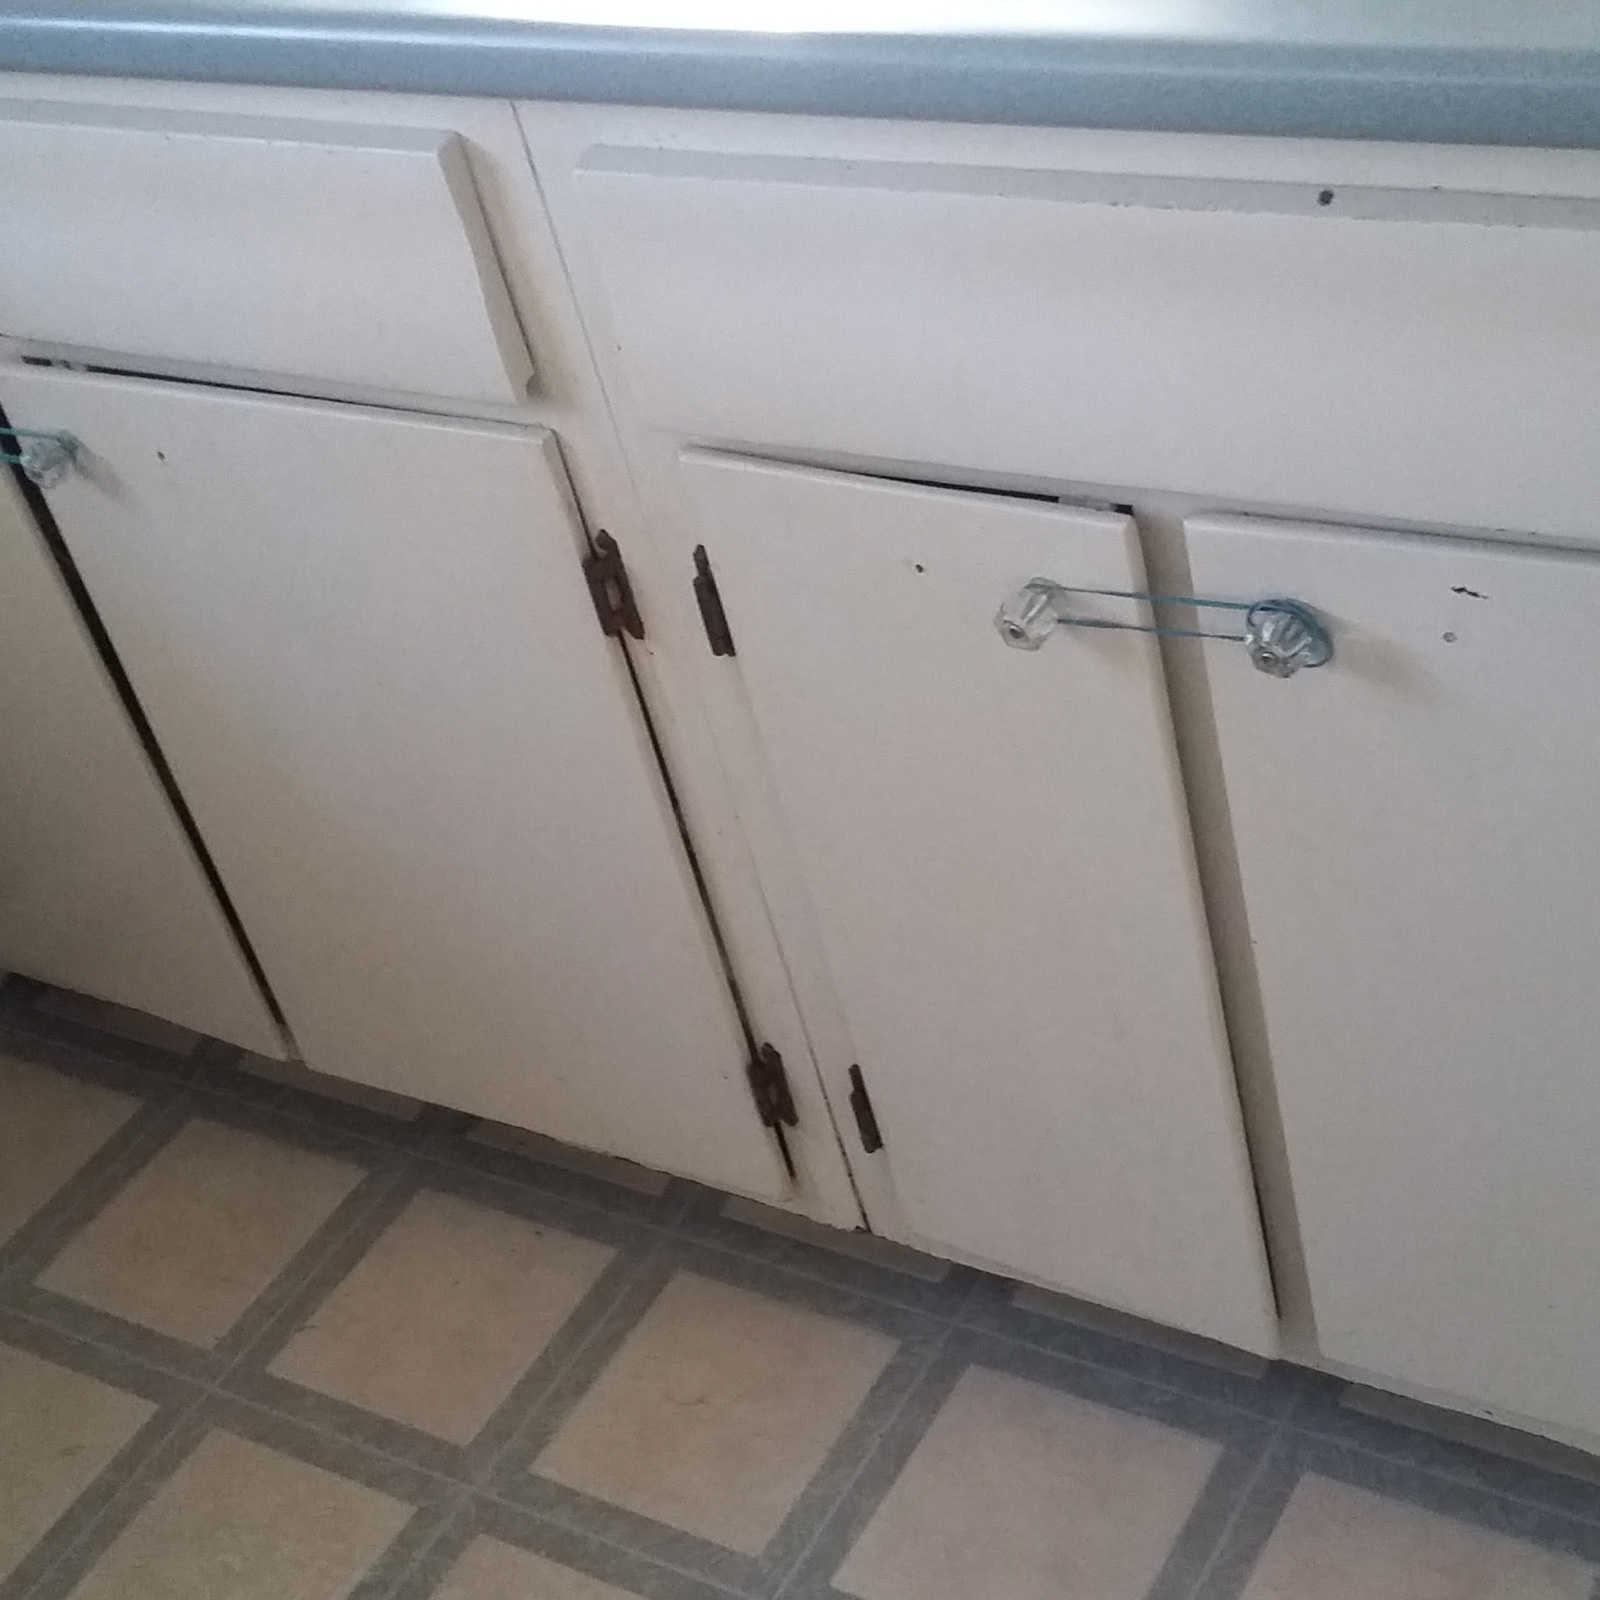 Entry 104 - Torn & tattered and unsightly makes for a total kitchen nightmare